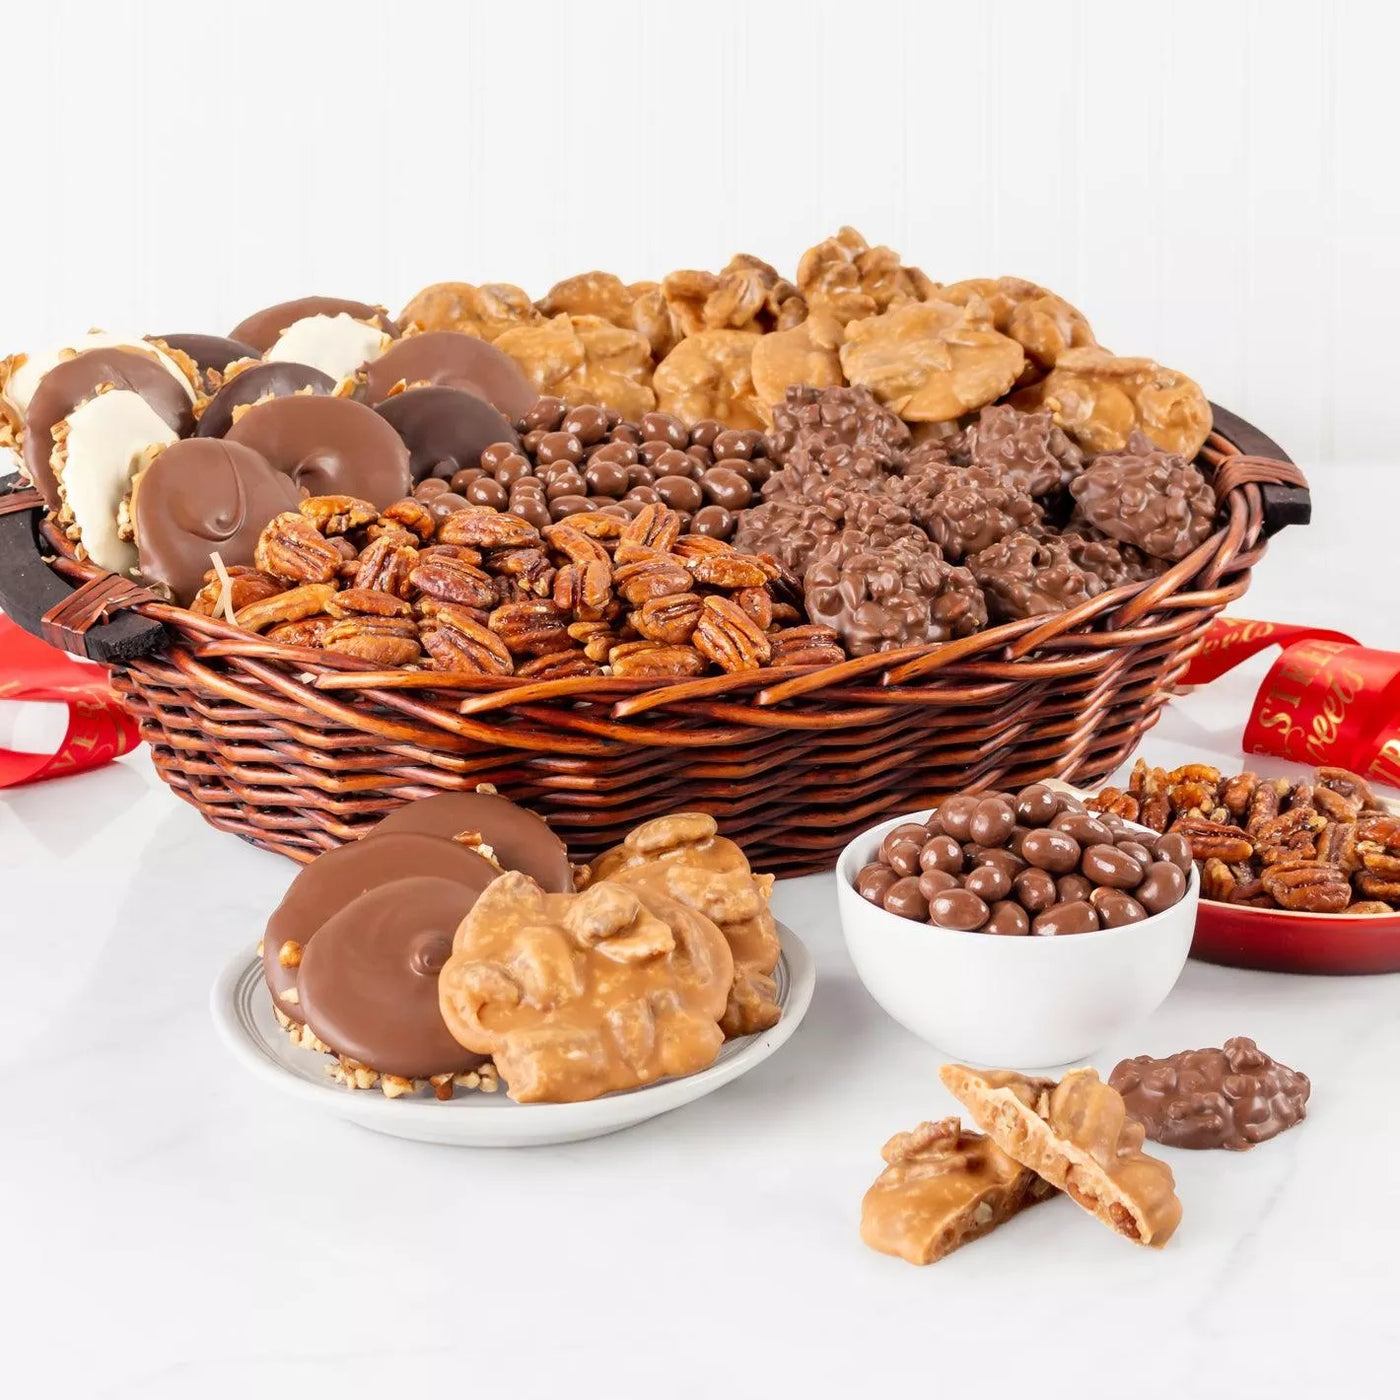 Office Party Basket - 25 person 